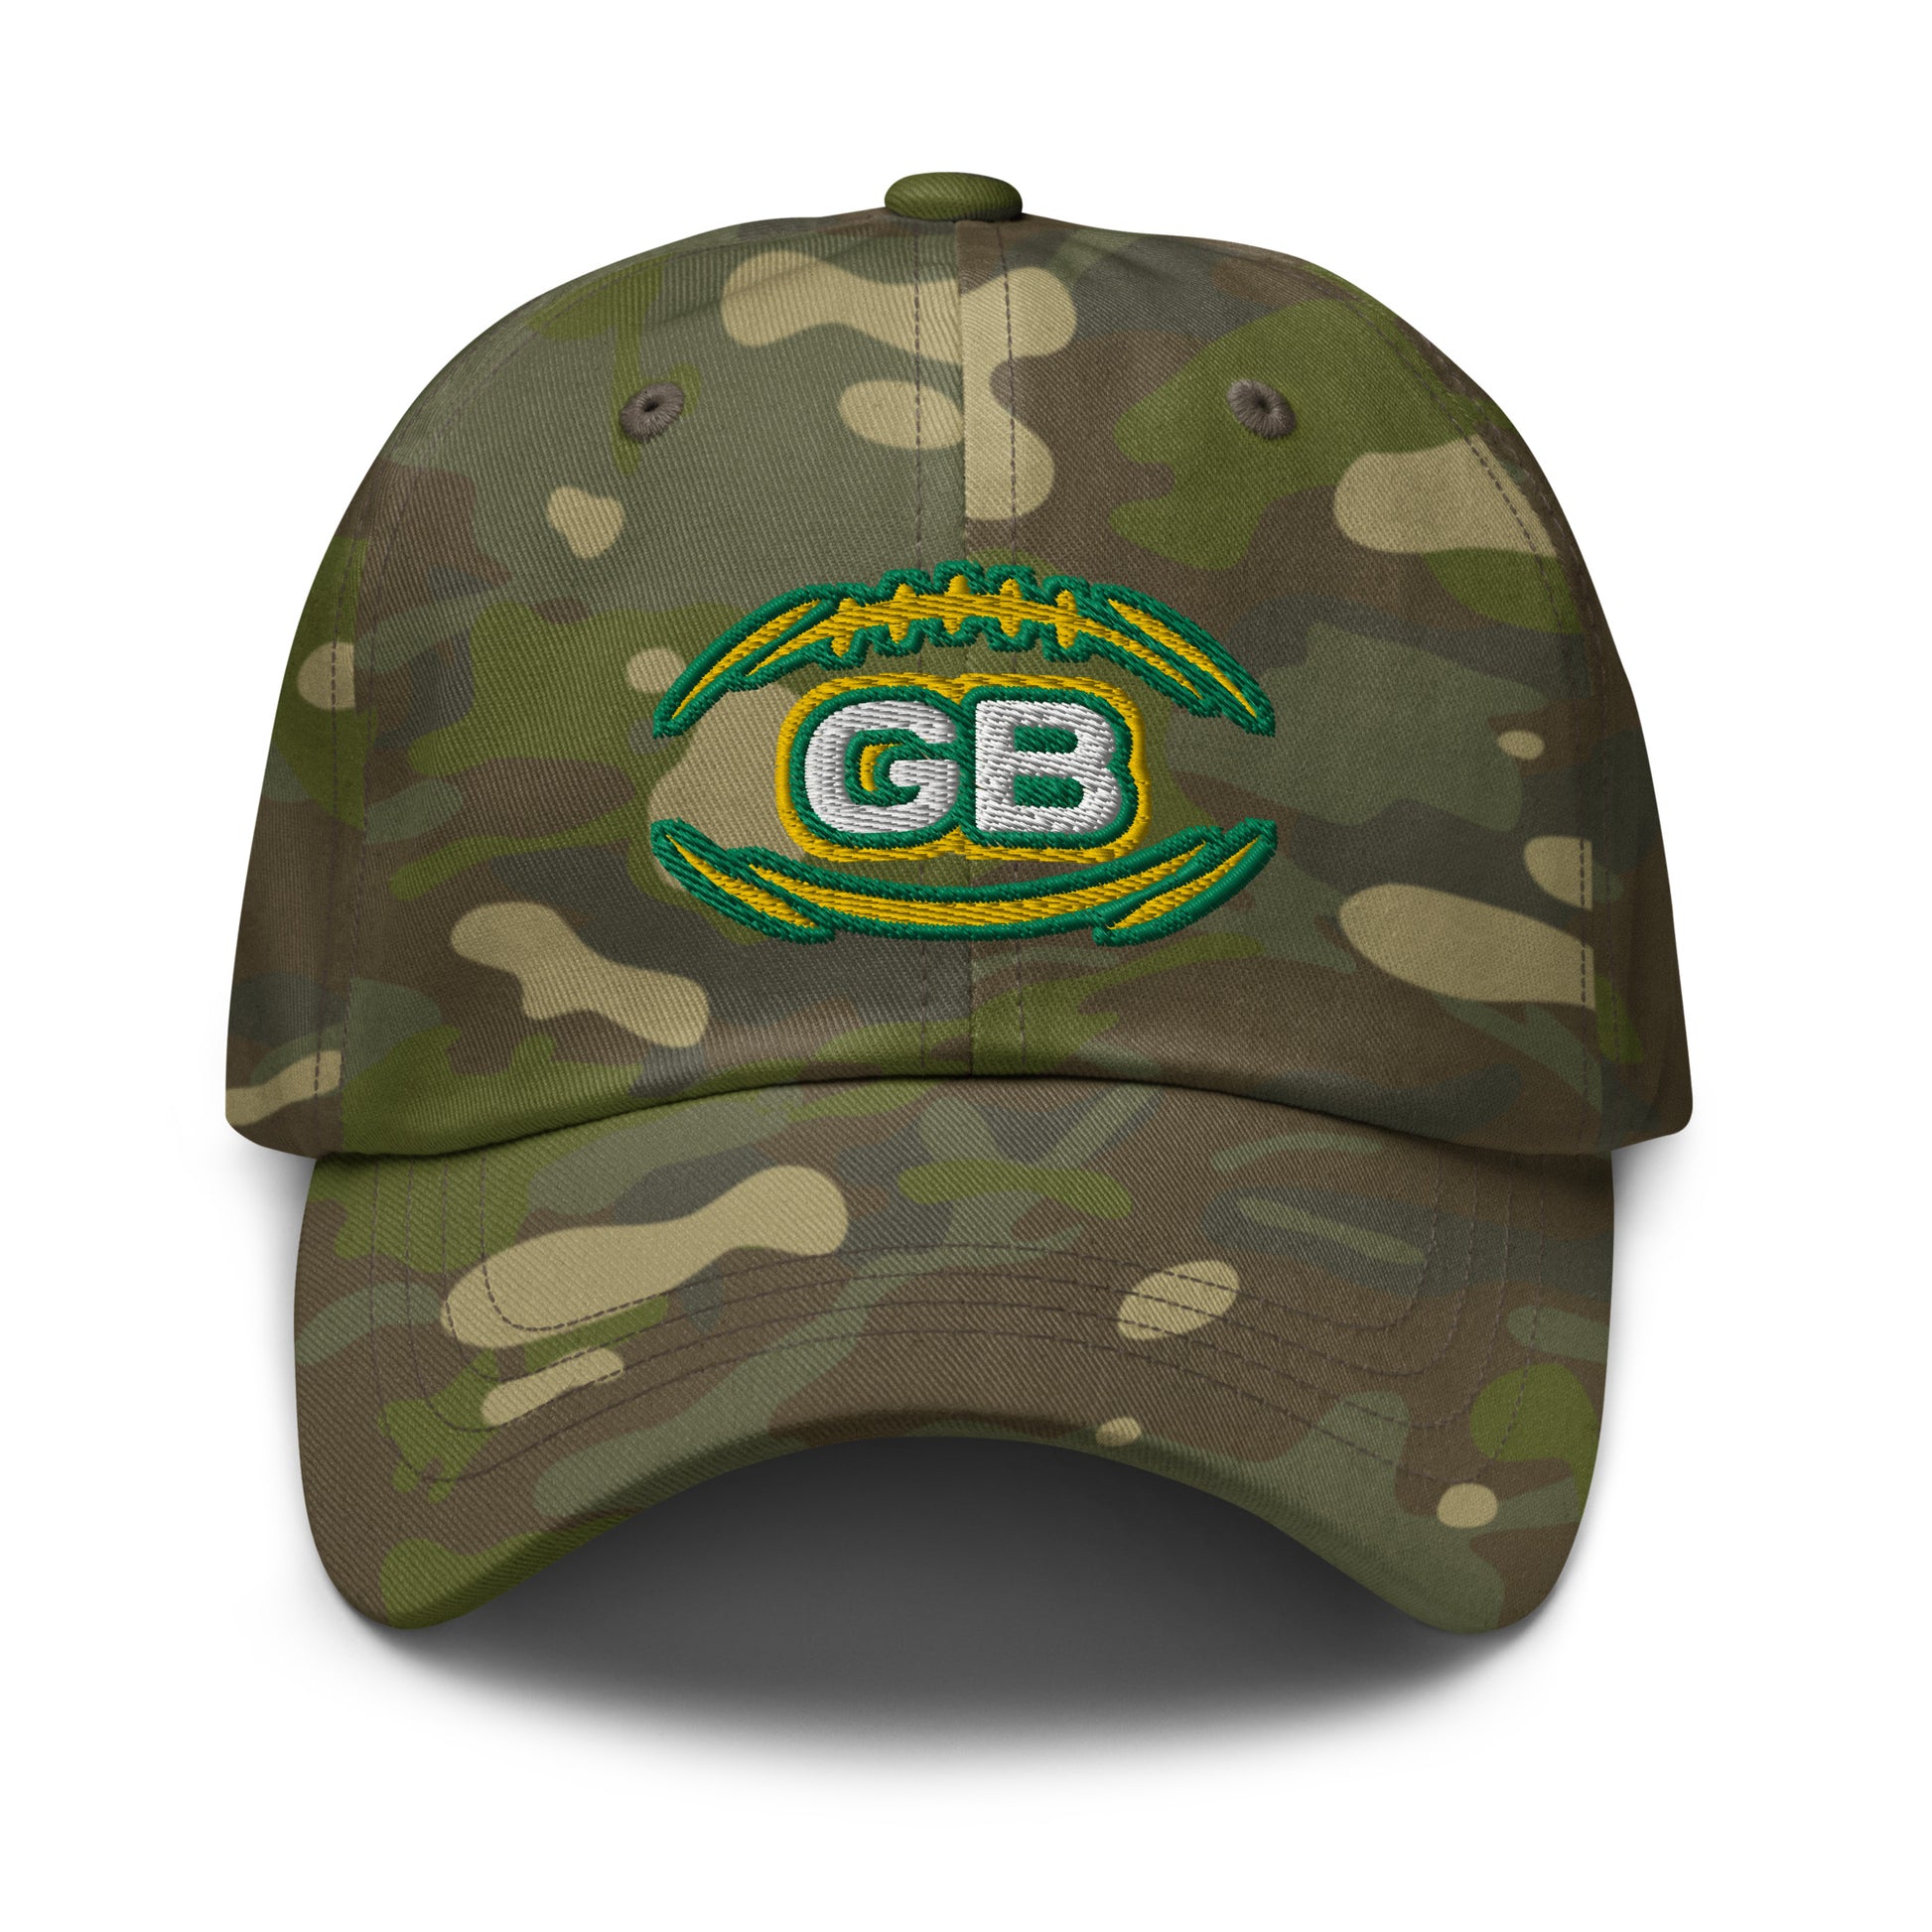 Packers Camo Hat / Green Bay Packers Hat / GB Hat / Multicam dad hat